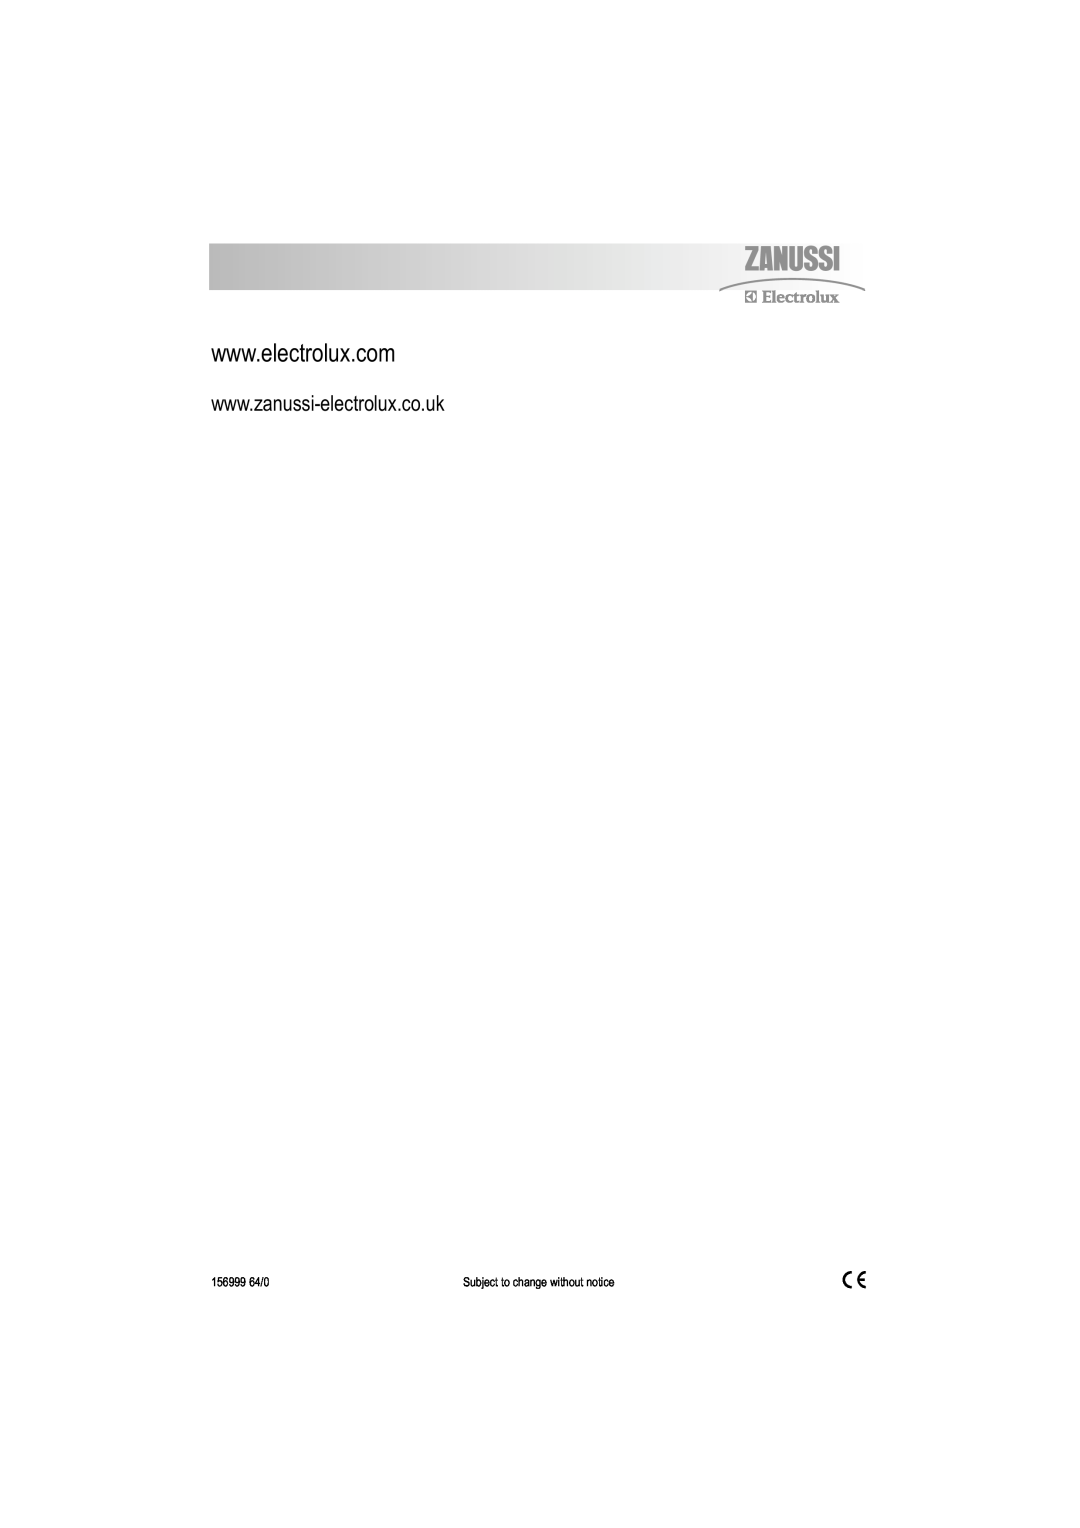 Zanussi ZDF 221 user manual 156999 64/0, Subject to change without notice 